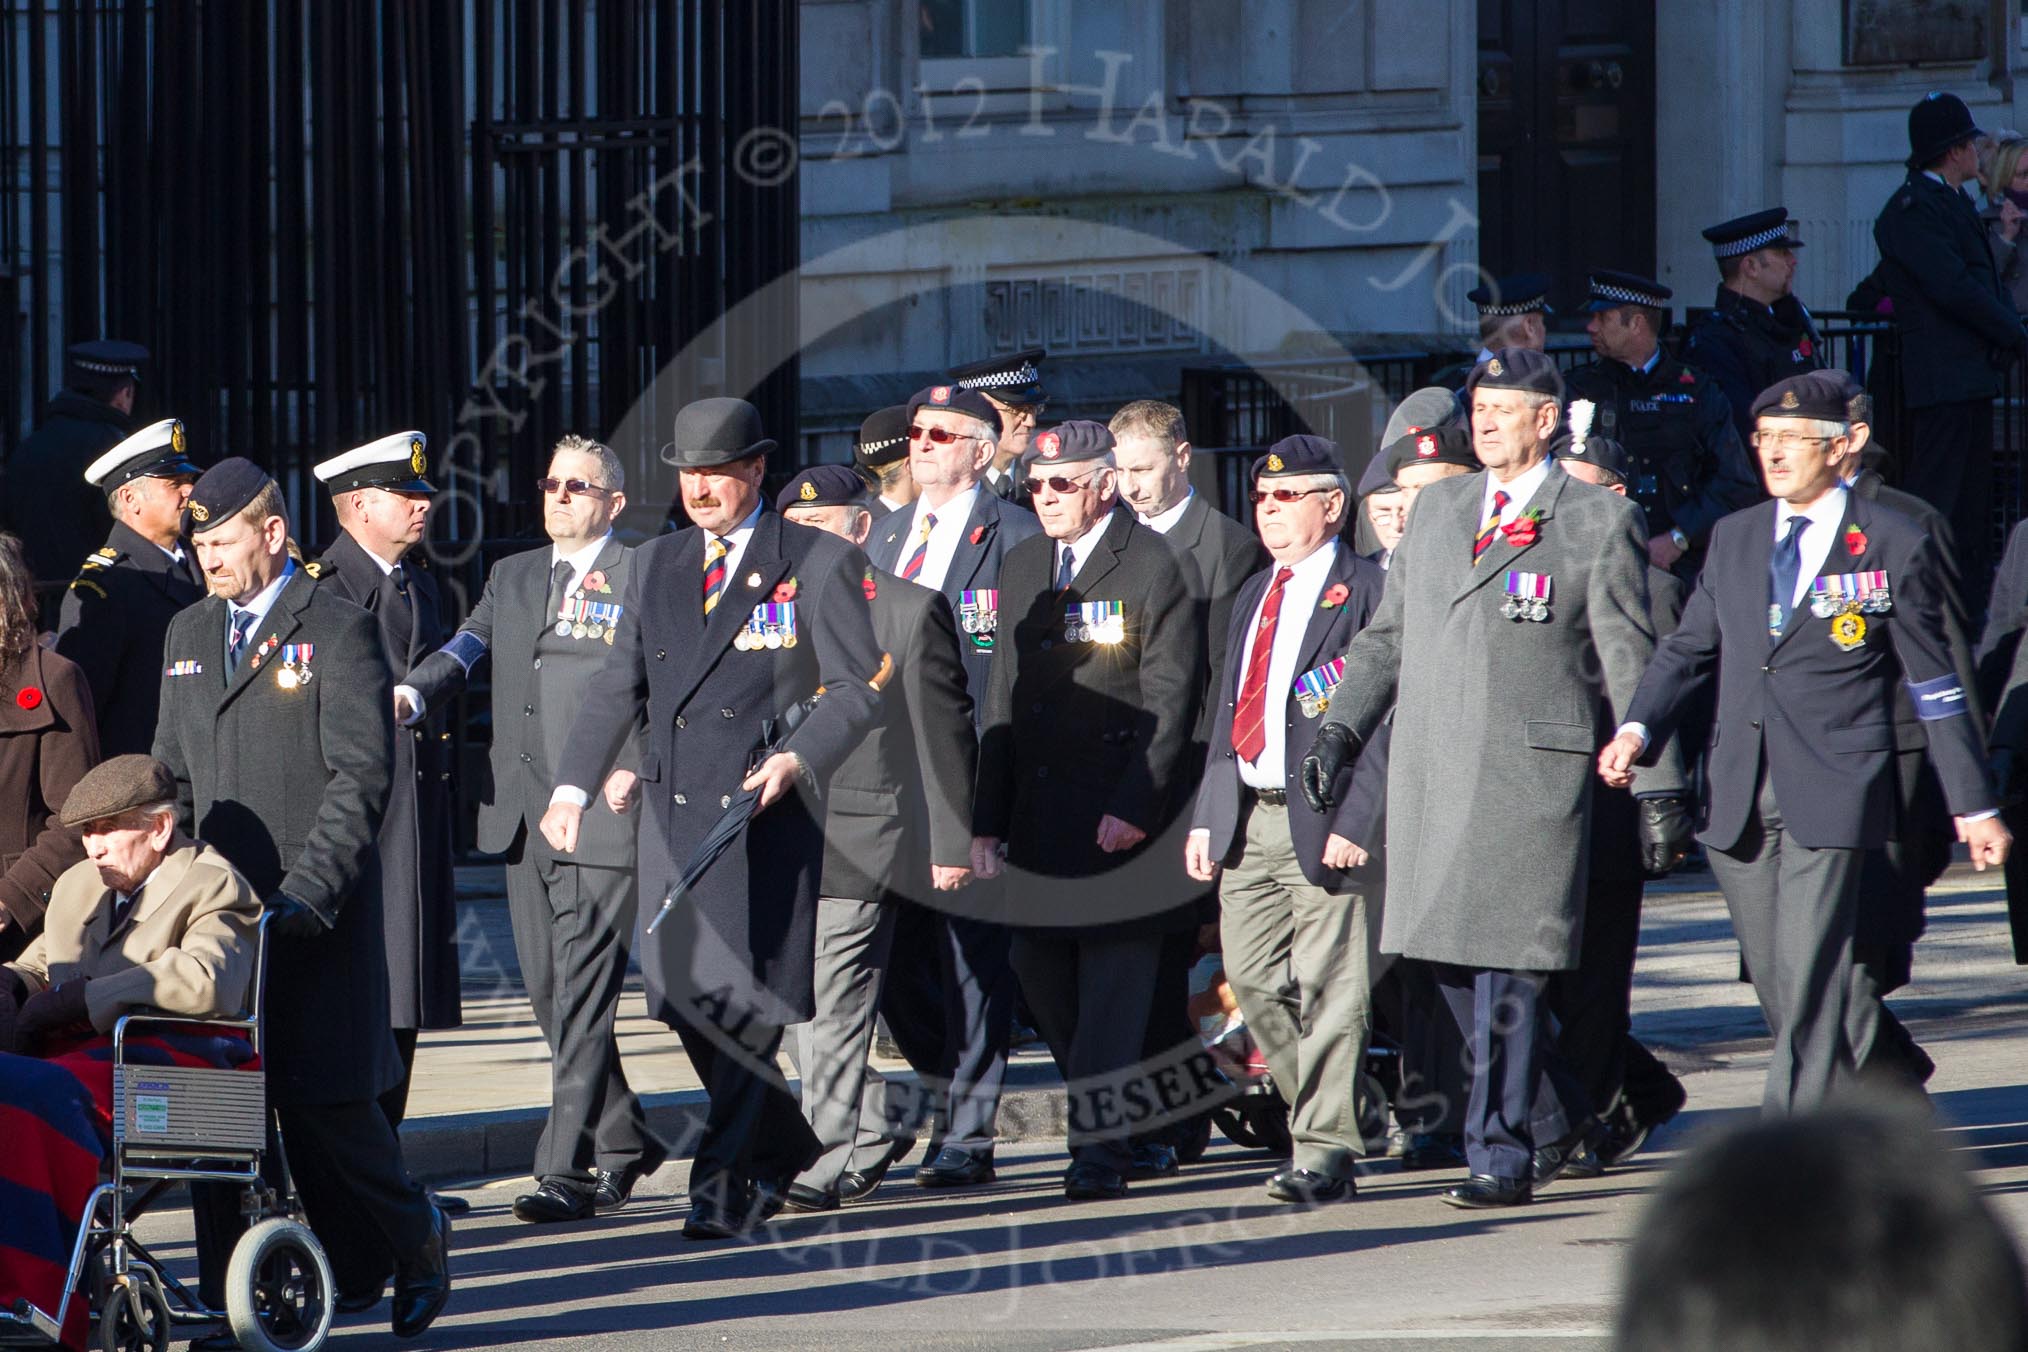 Remembrance Sunday 2012 Cenotaph March Past: Group C1, Blind Veterans UK and B1, Royal Army Medical Corps Association..
Whitehall, Cenotaph,
London SW1,

United Kingdom,
on 11 November 2012 at 11:54, image #802